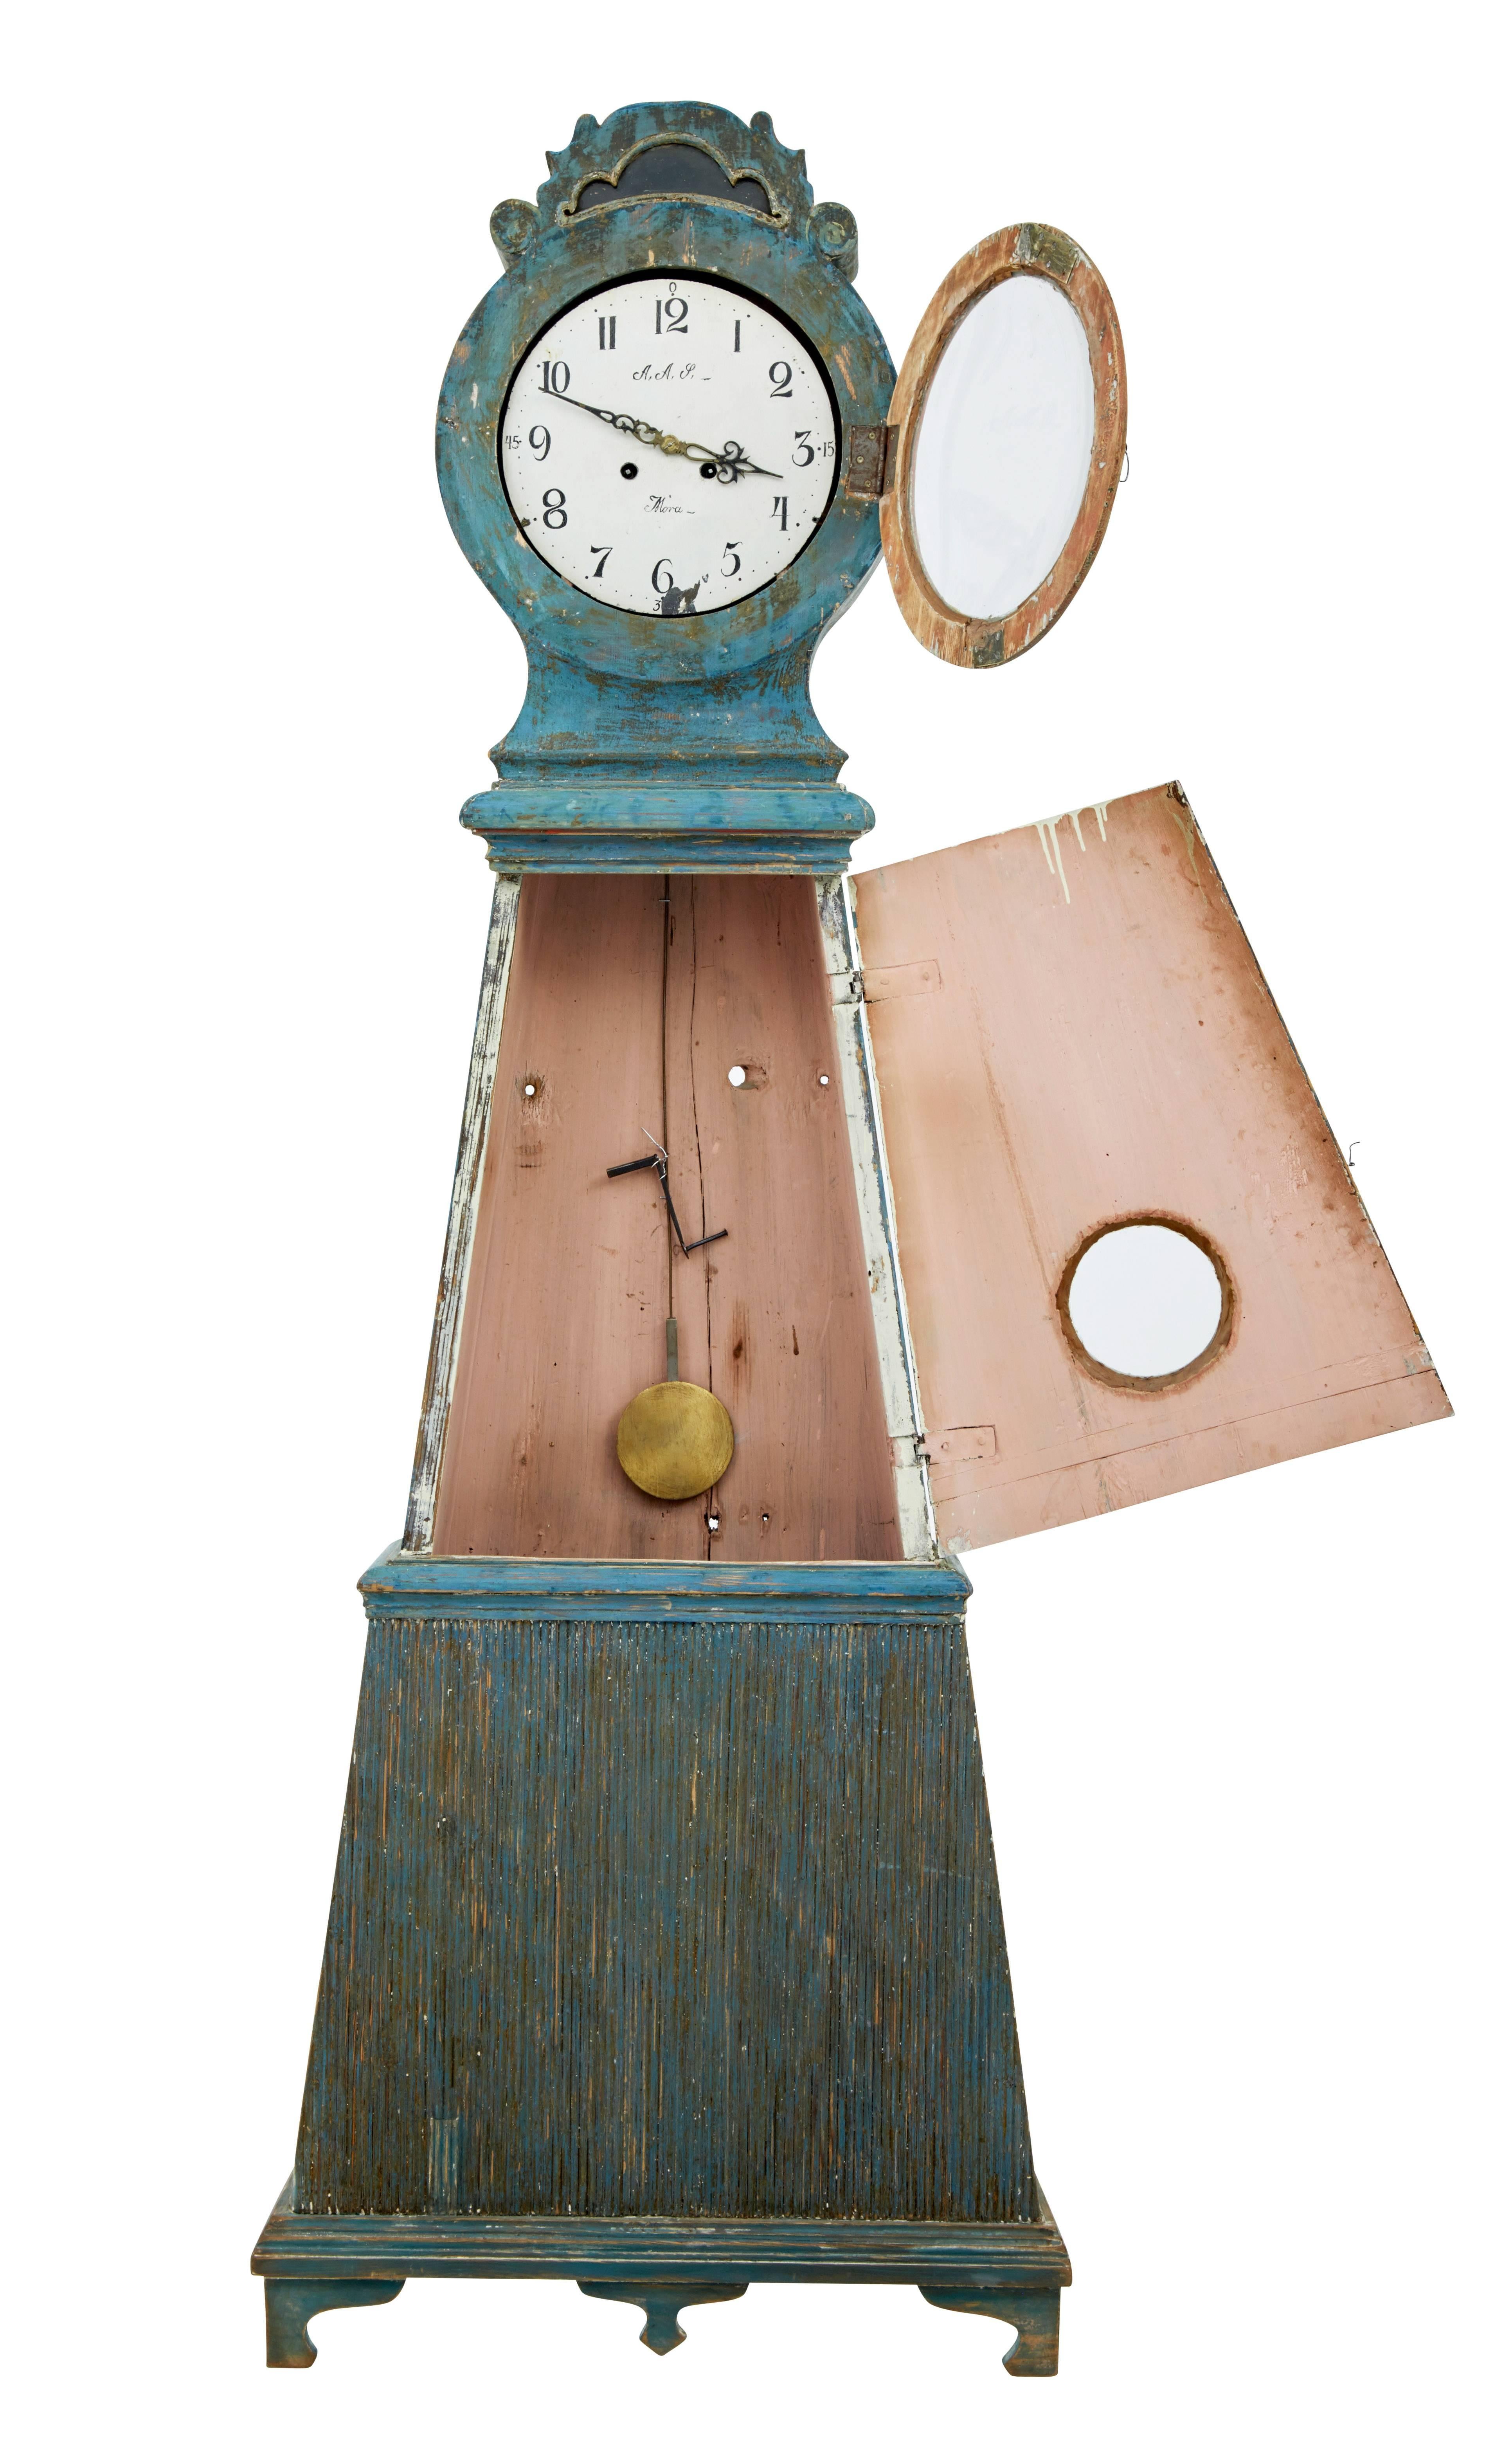 Stunning long case clock, circa 1850.
Presented to you with original scraped back paint.
Clock dial with makers initials from the Mora region.
Pyramid shaped with fluted detailing.
Complete with pendulum, weights and winding handle. We recommend